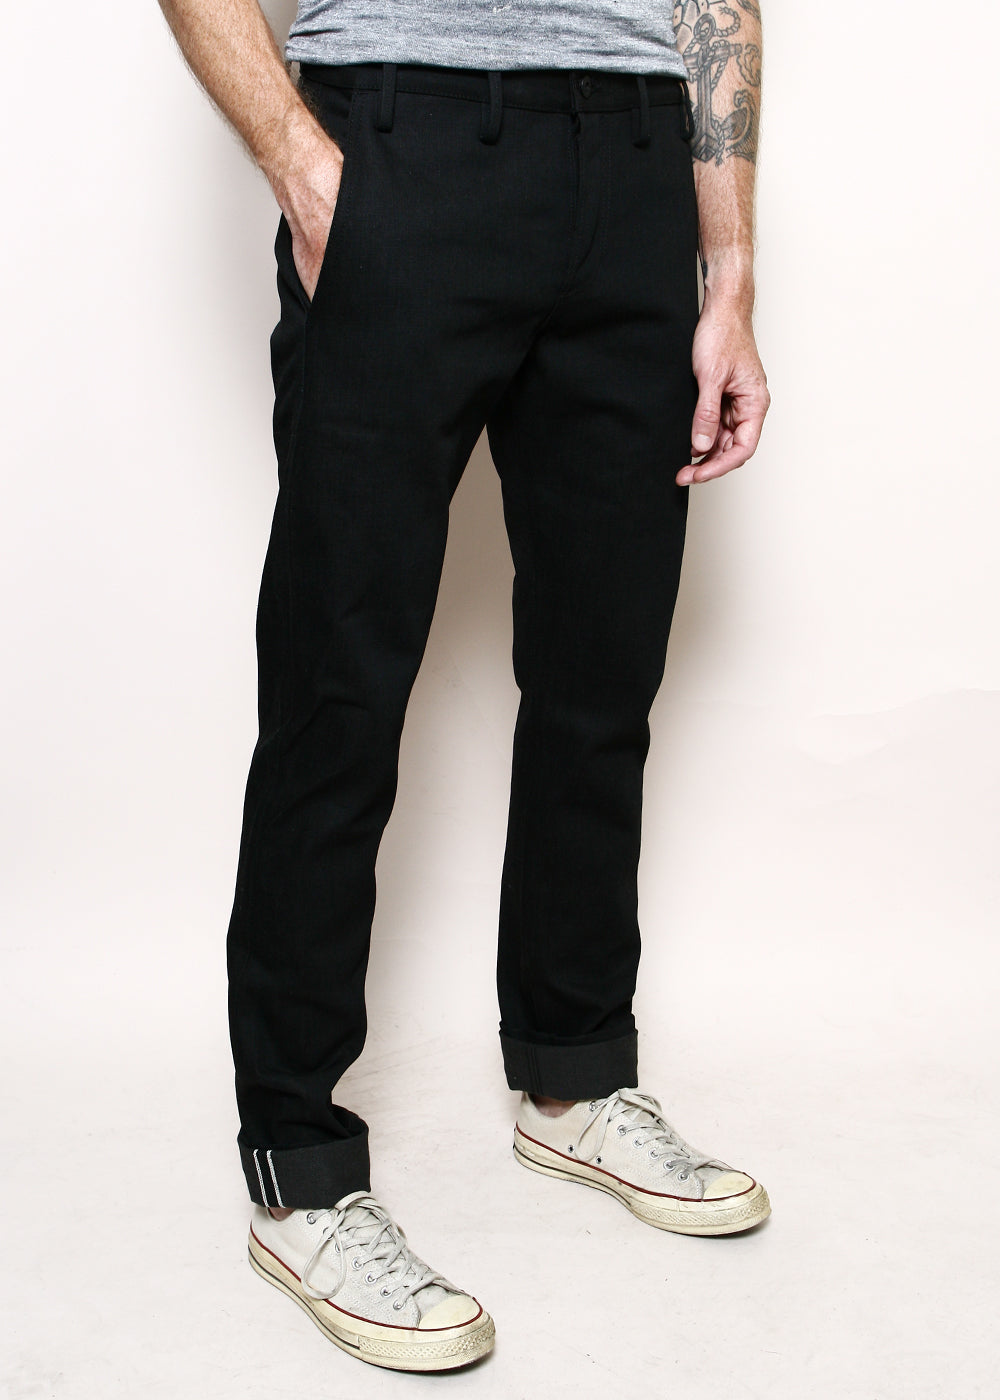 Officer Trousers // 15oz Stealth – Rogue Territory